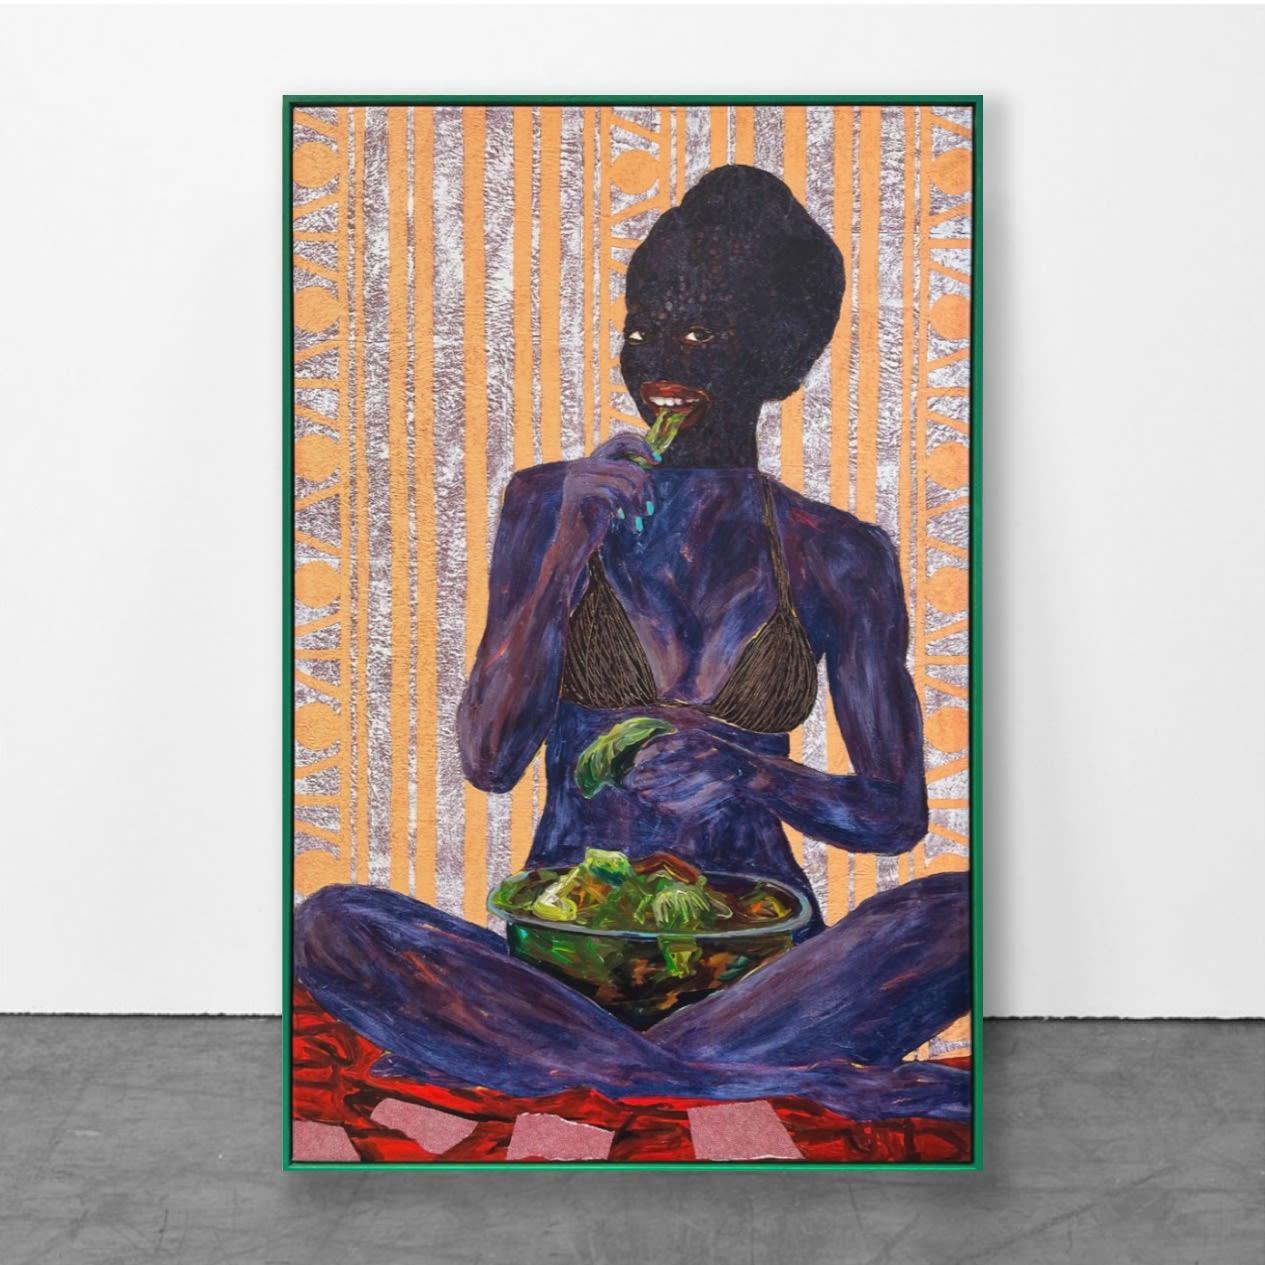 Sekajugo works with the manipulation of stock images to reveal their inherent biases of Western entitlement and privilege. With this artwork, the artist highlights a reversal of mainstream culture through the lens of an African sense for